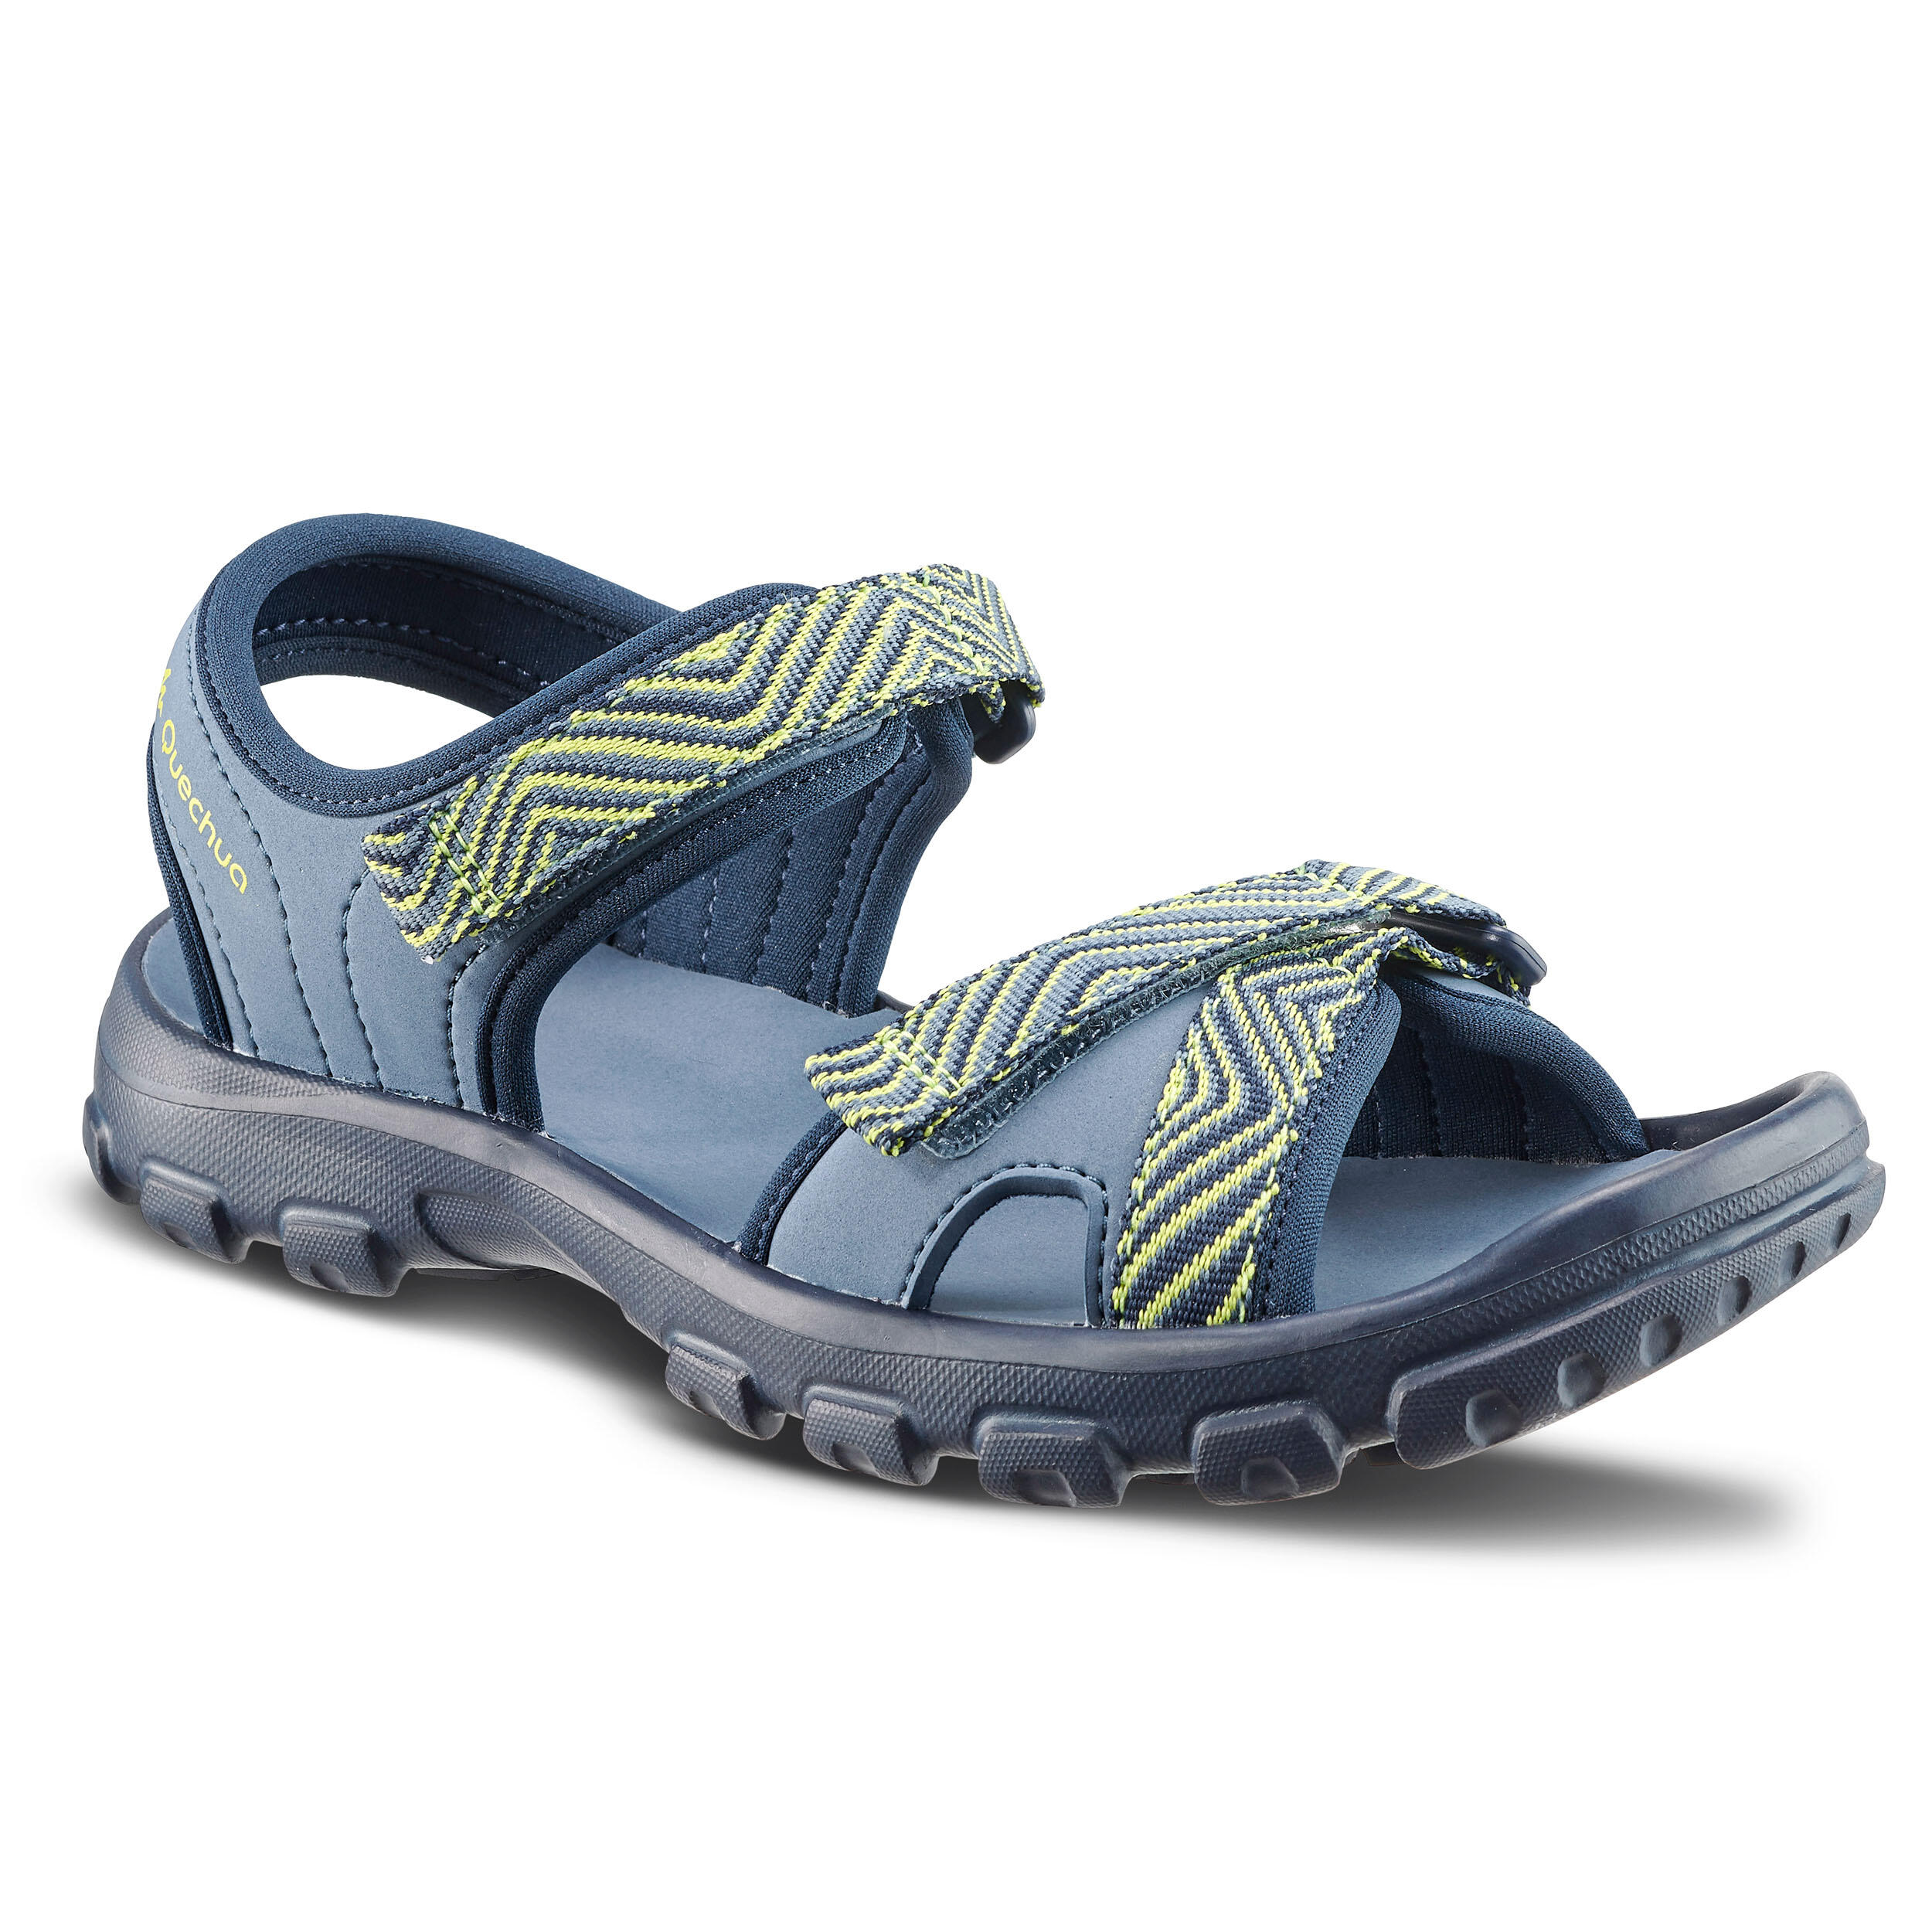 Kids' hiking sandals - Kids' MH100 blue and yellow - size 24 to 31 -  Decathlon